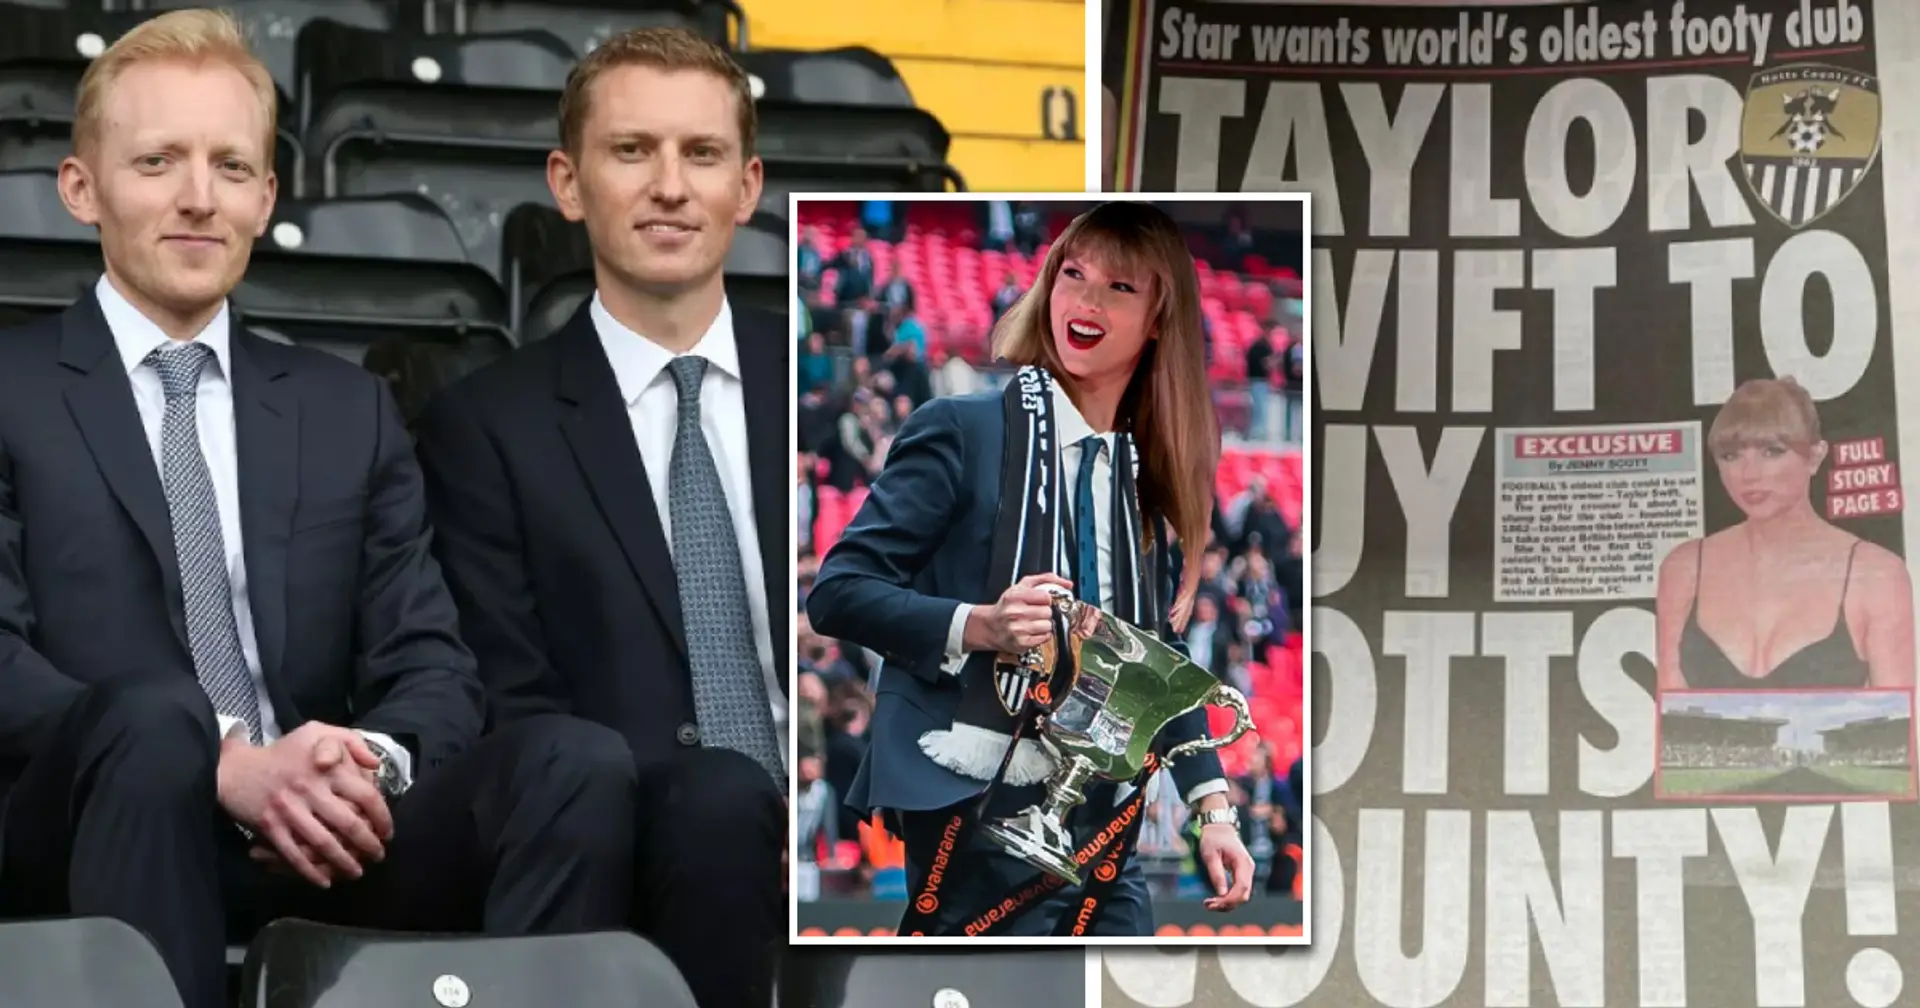 'We’ll leave a blank space': Notts County owners on wild rumours that Taylor Swift wants to buy the club 